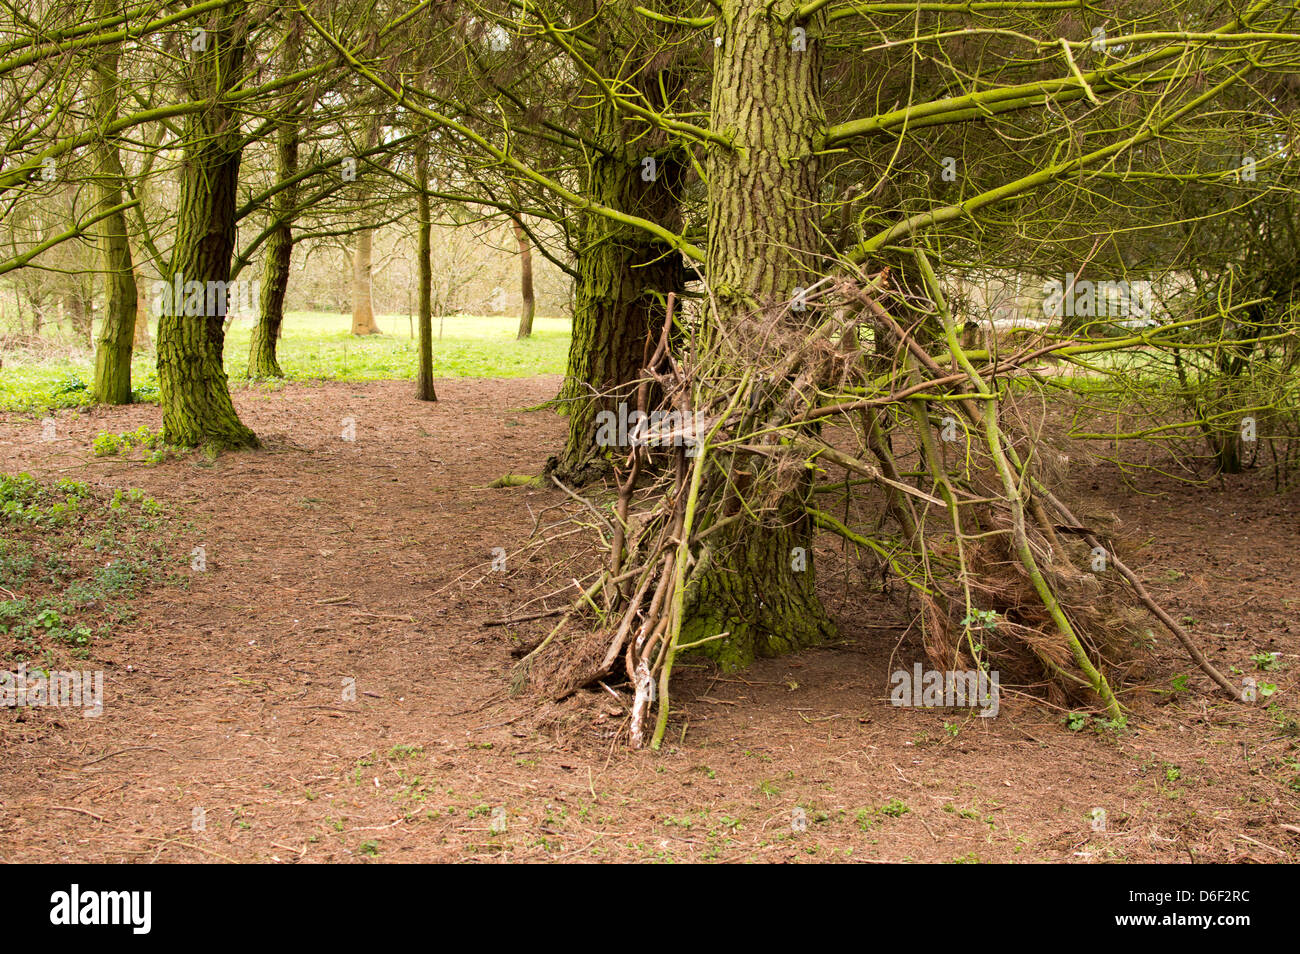 A child's attempt to make a den or camp out of old sticks and branches. Stock Photo